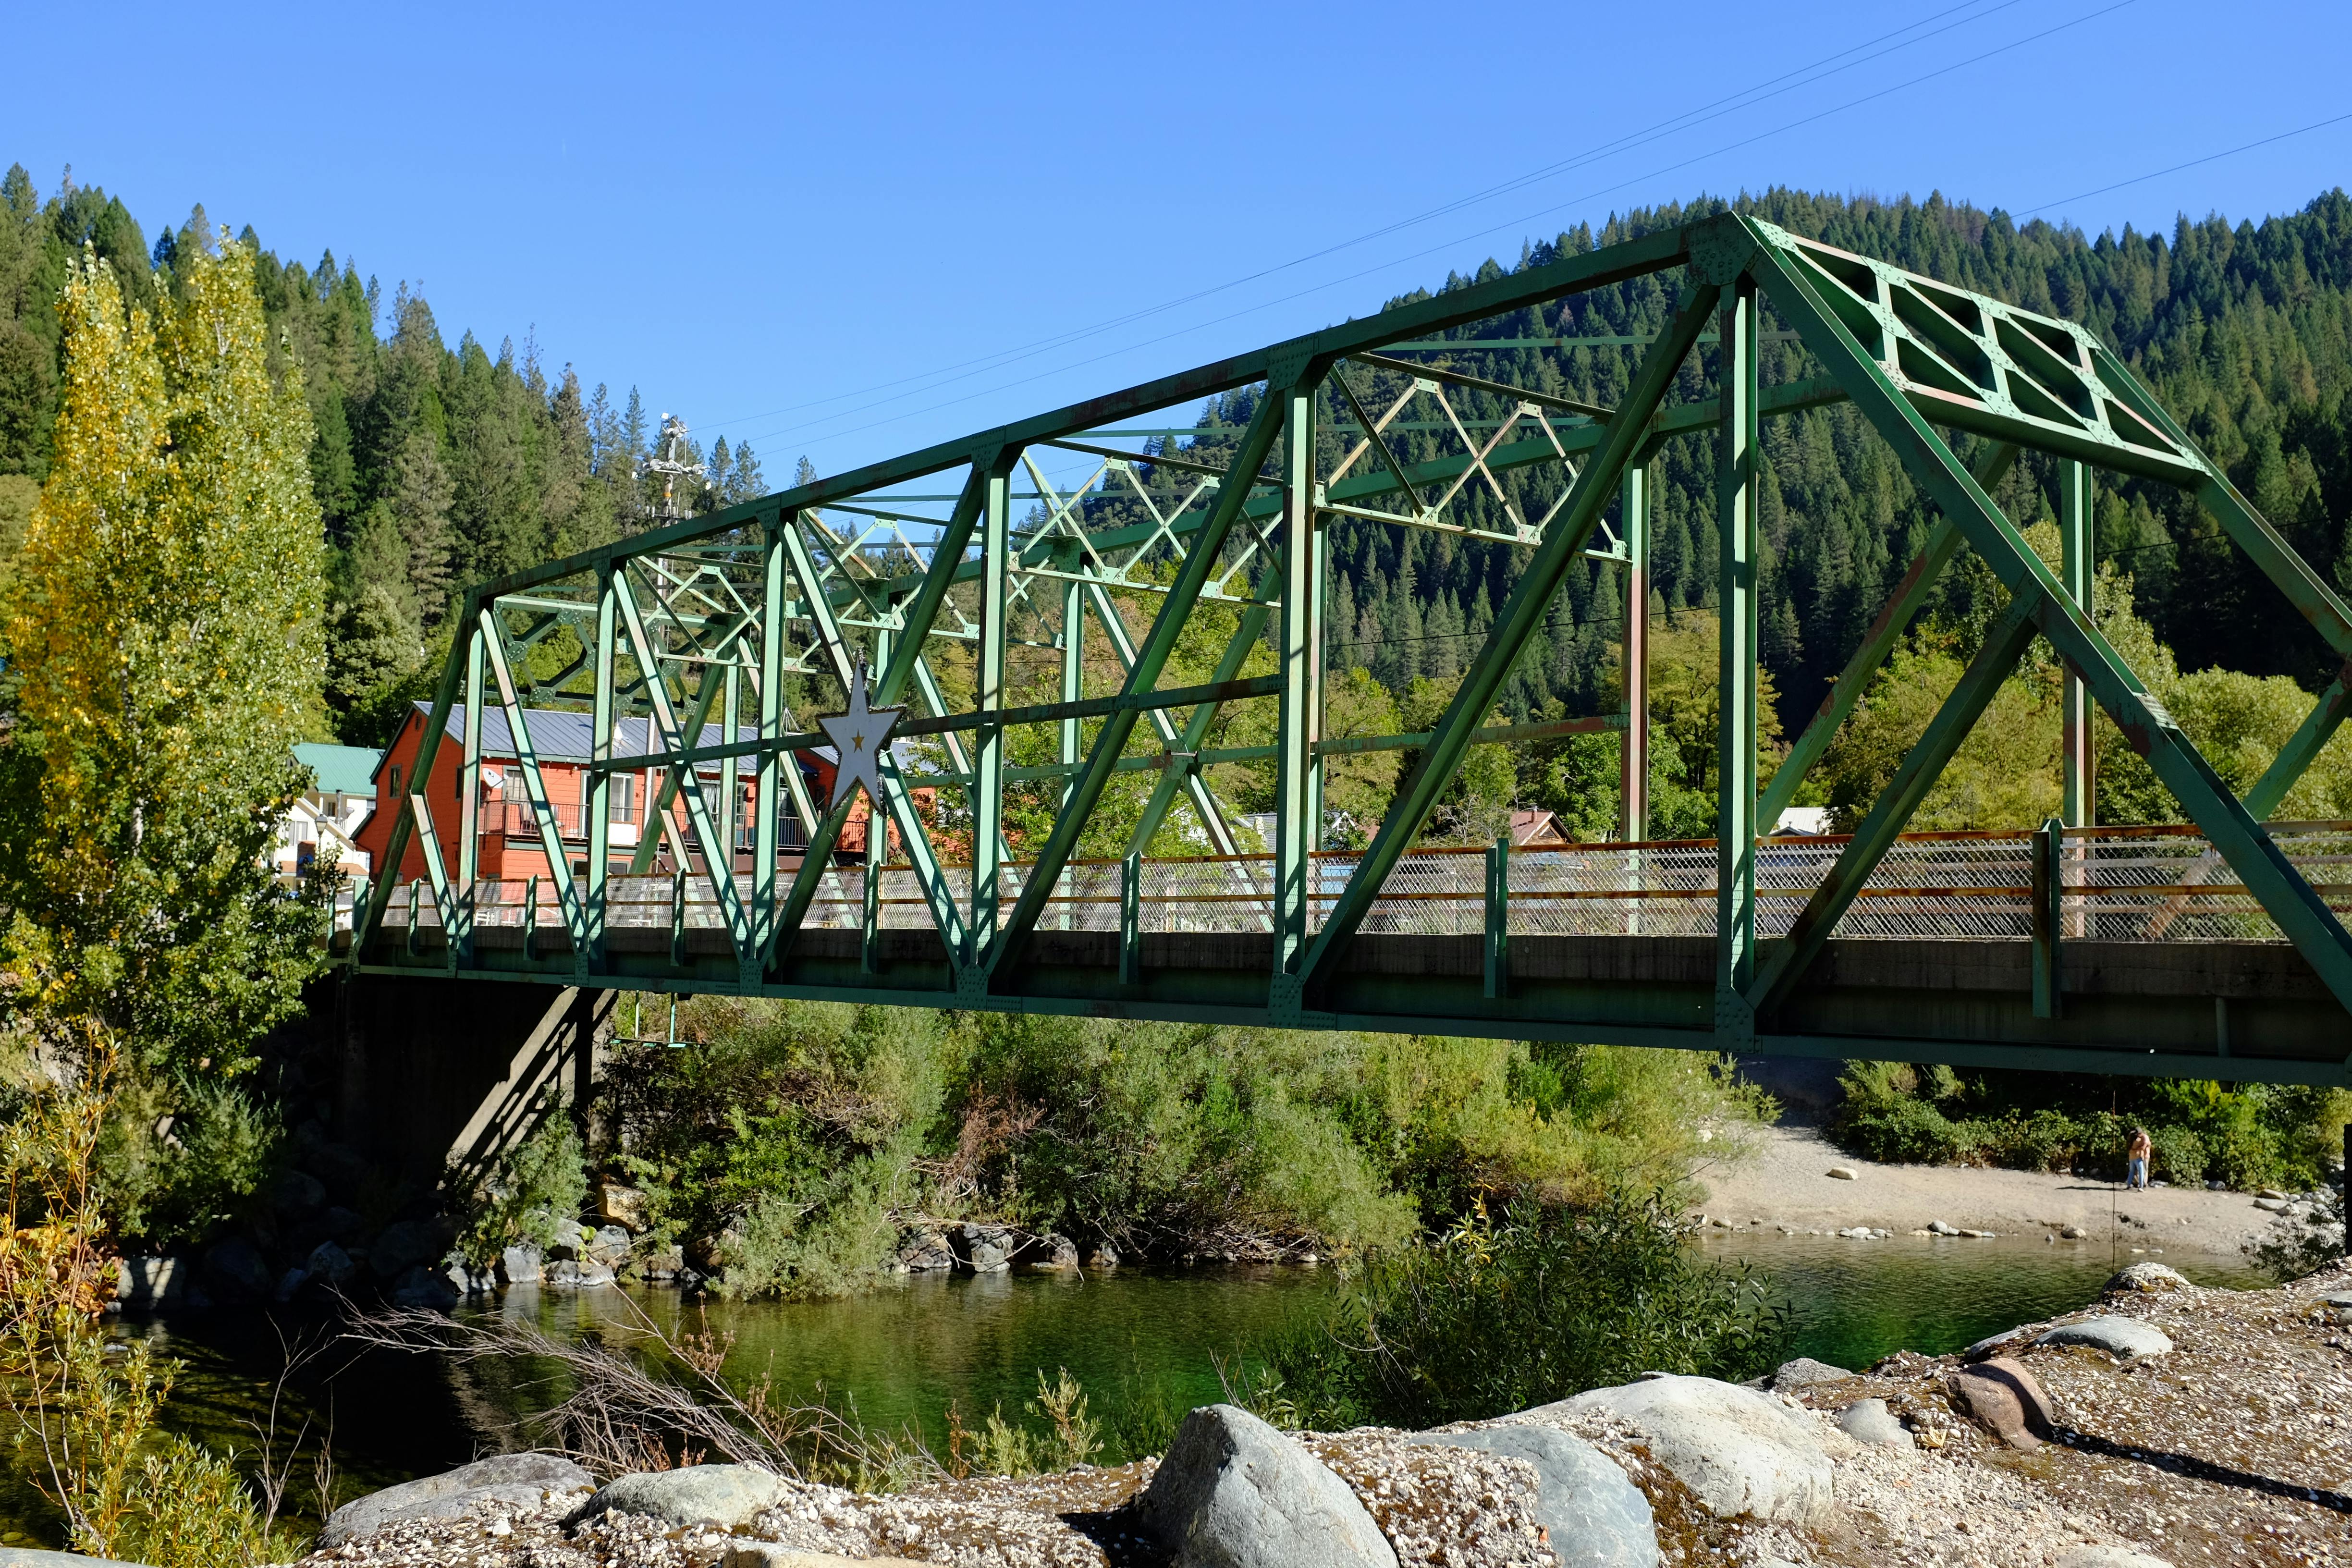 An image of the Durgan Bridge in Downieville.